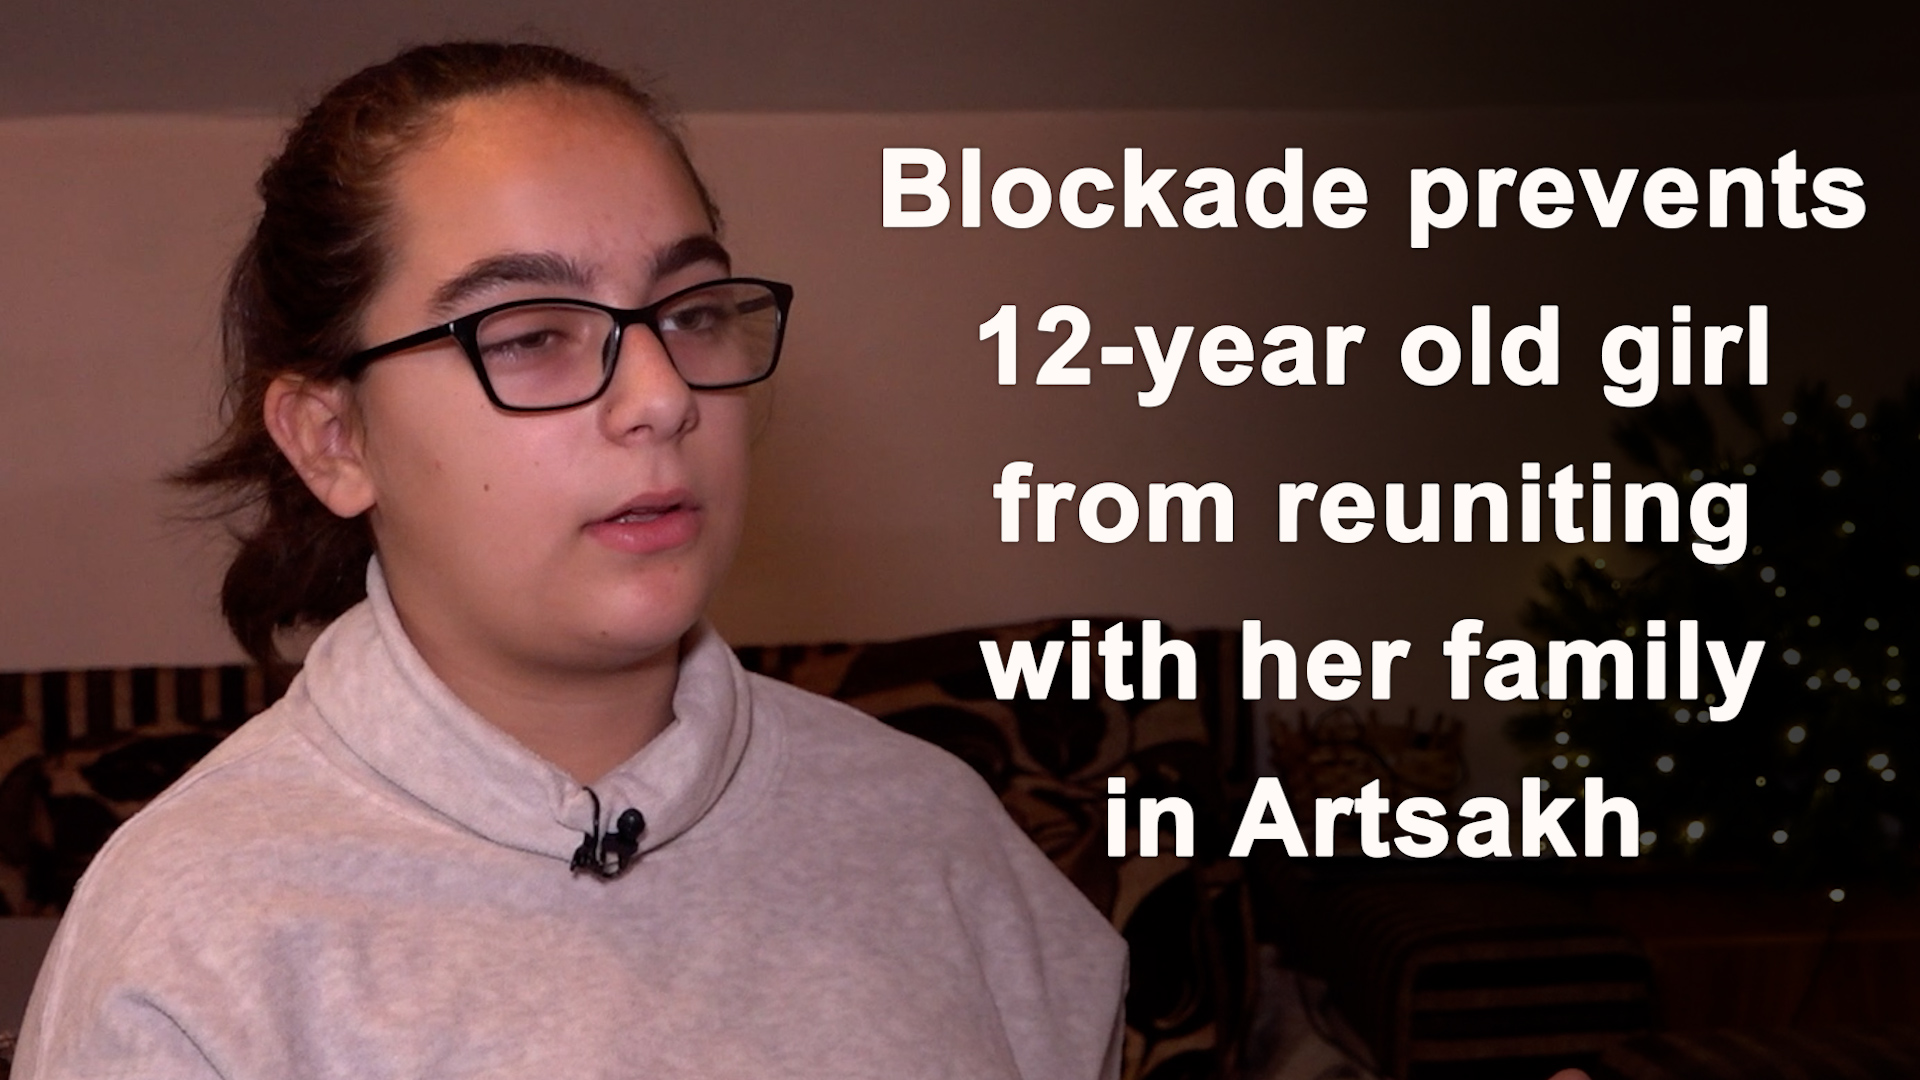 Blockade prevents 12-year old girl from reuniting with her family in Artsakh